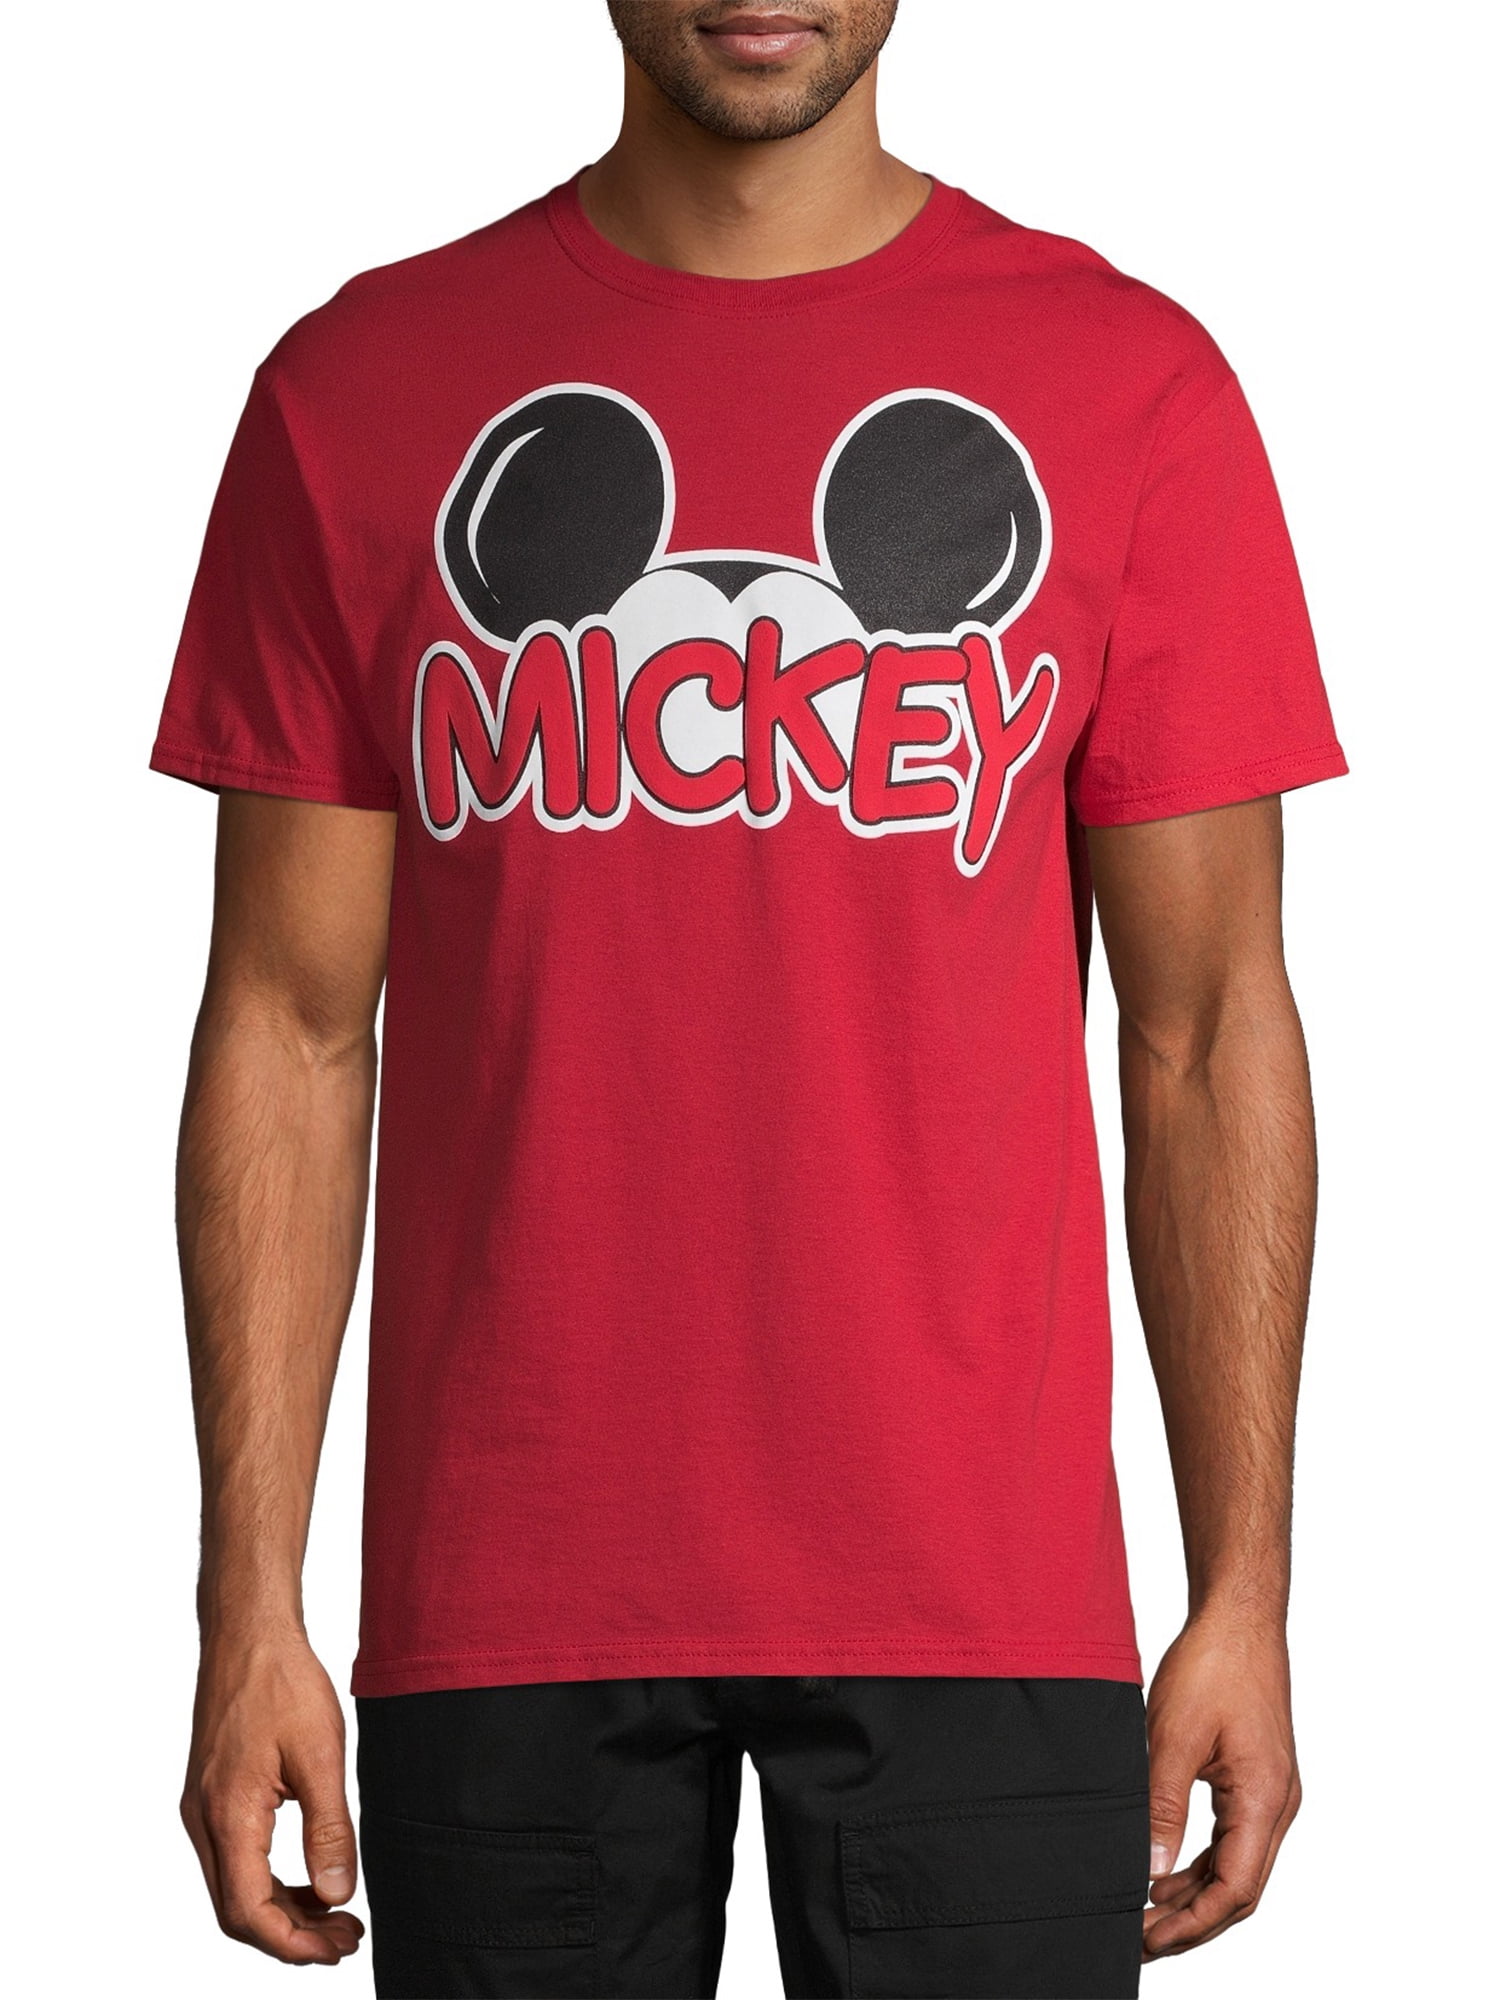 Mickey Ears T-Shirt-XLarge Signature Mouse Disney Family